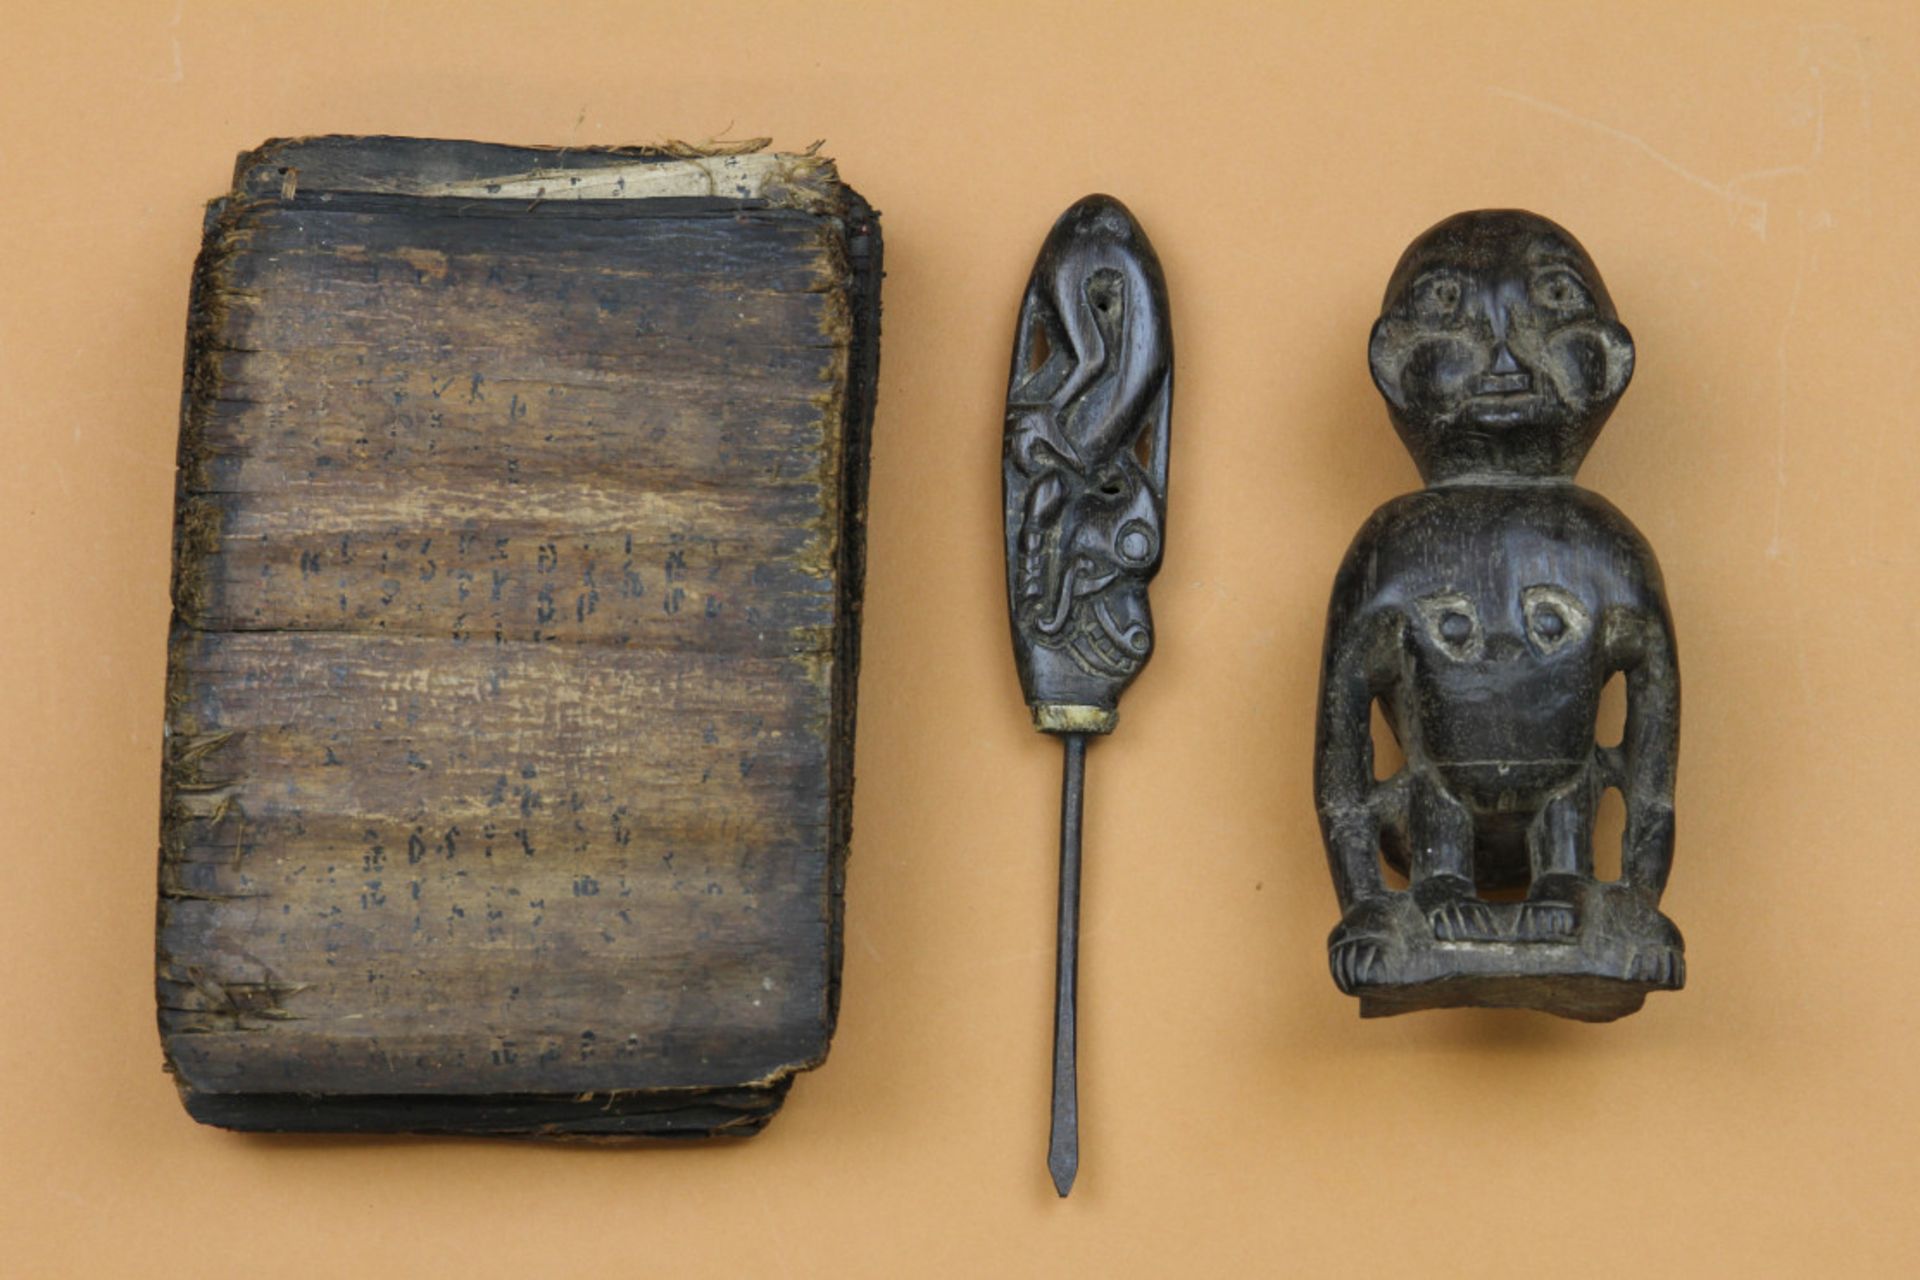 Dayak, braid prong and a carved wooden animal figure and Batak, a shaman book.